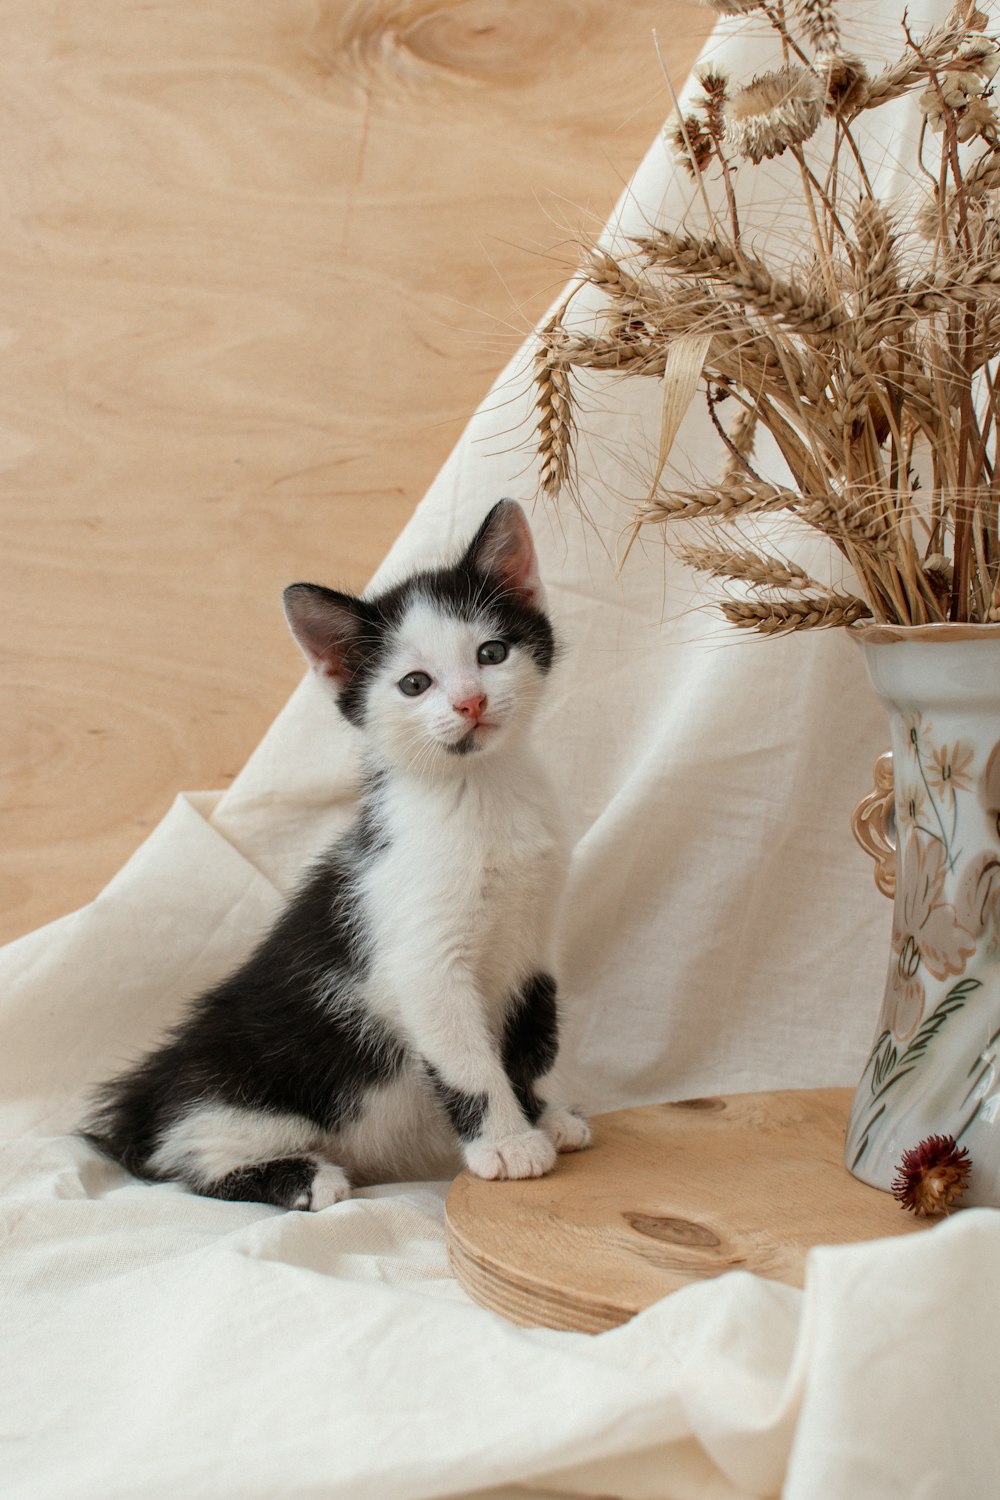 a black and white kitten sitting next to a vase